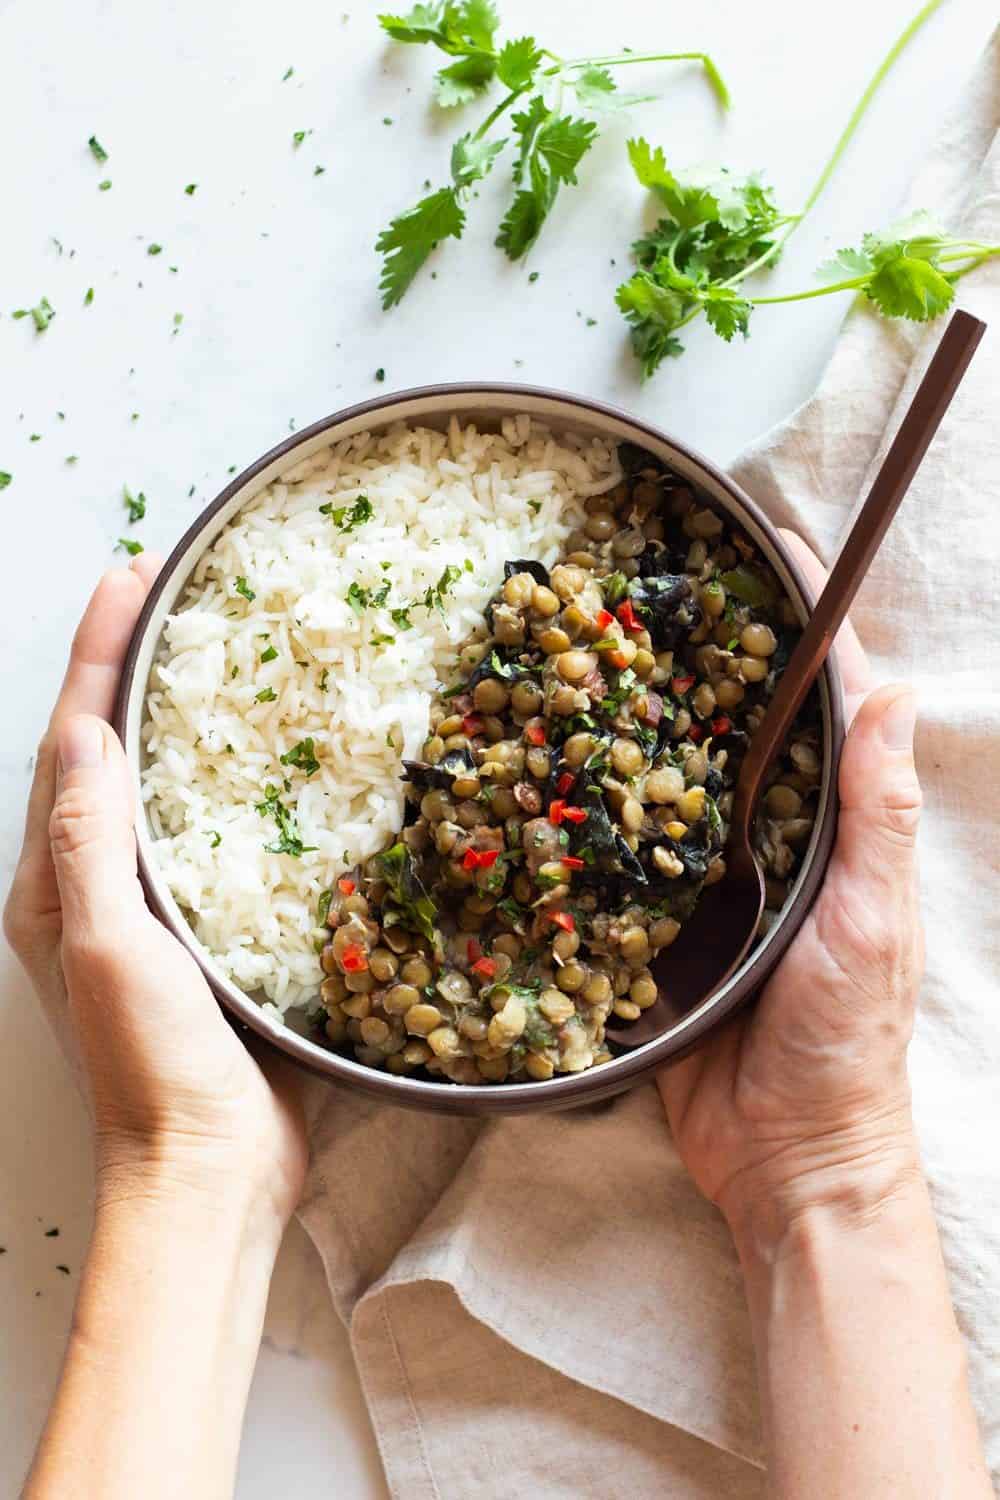 Lentils and Rice in a Bowl held in hands.